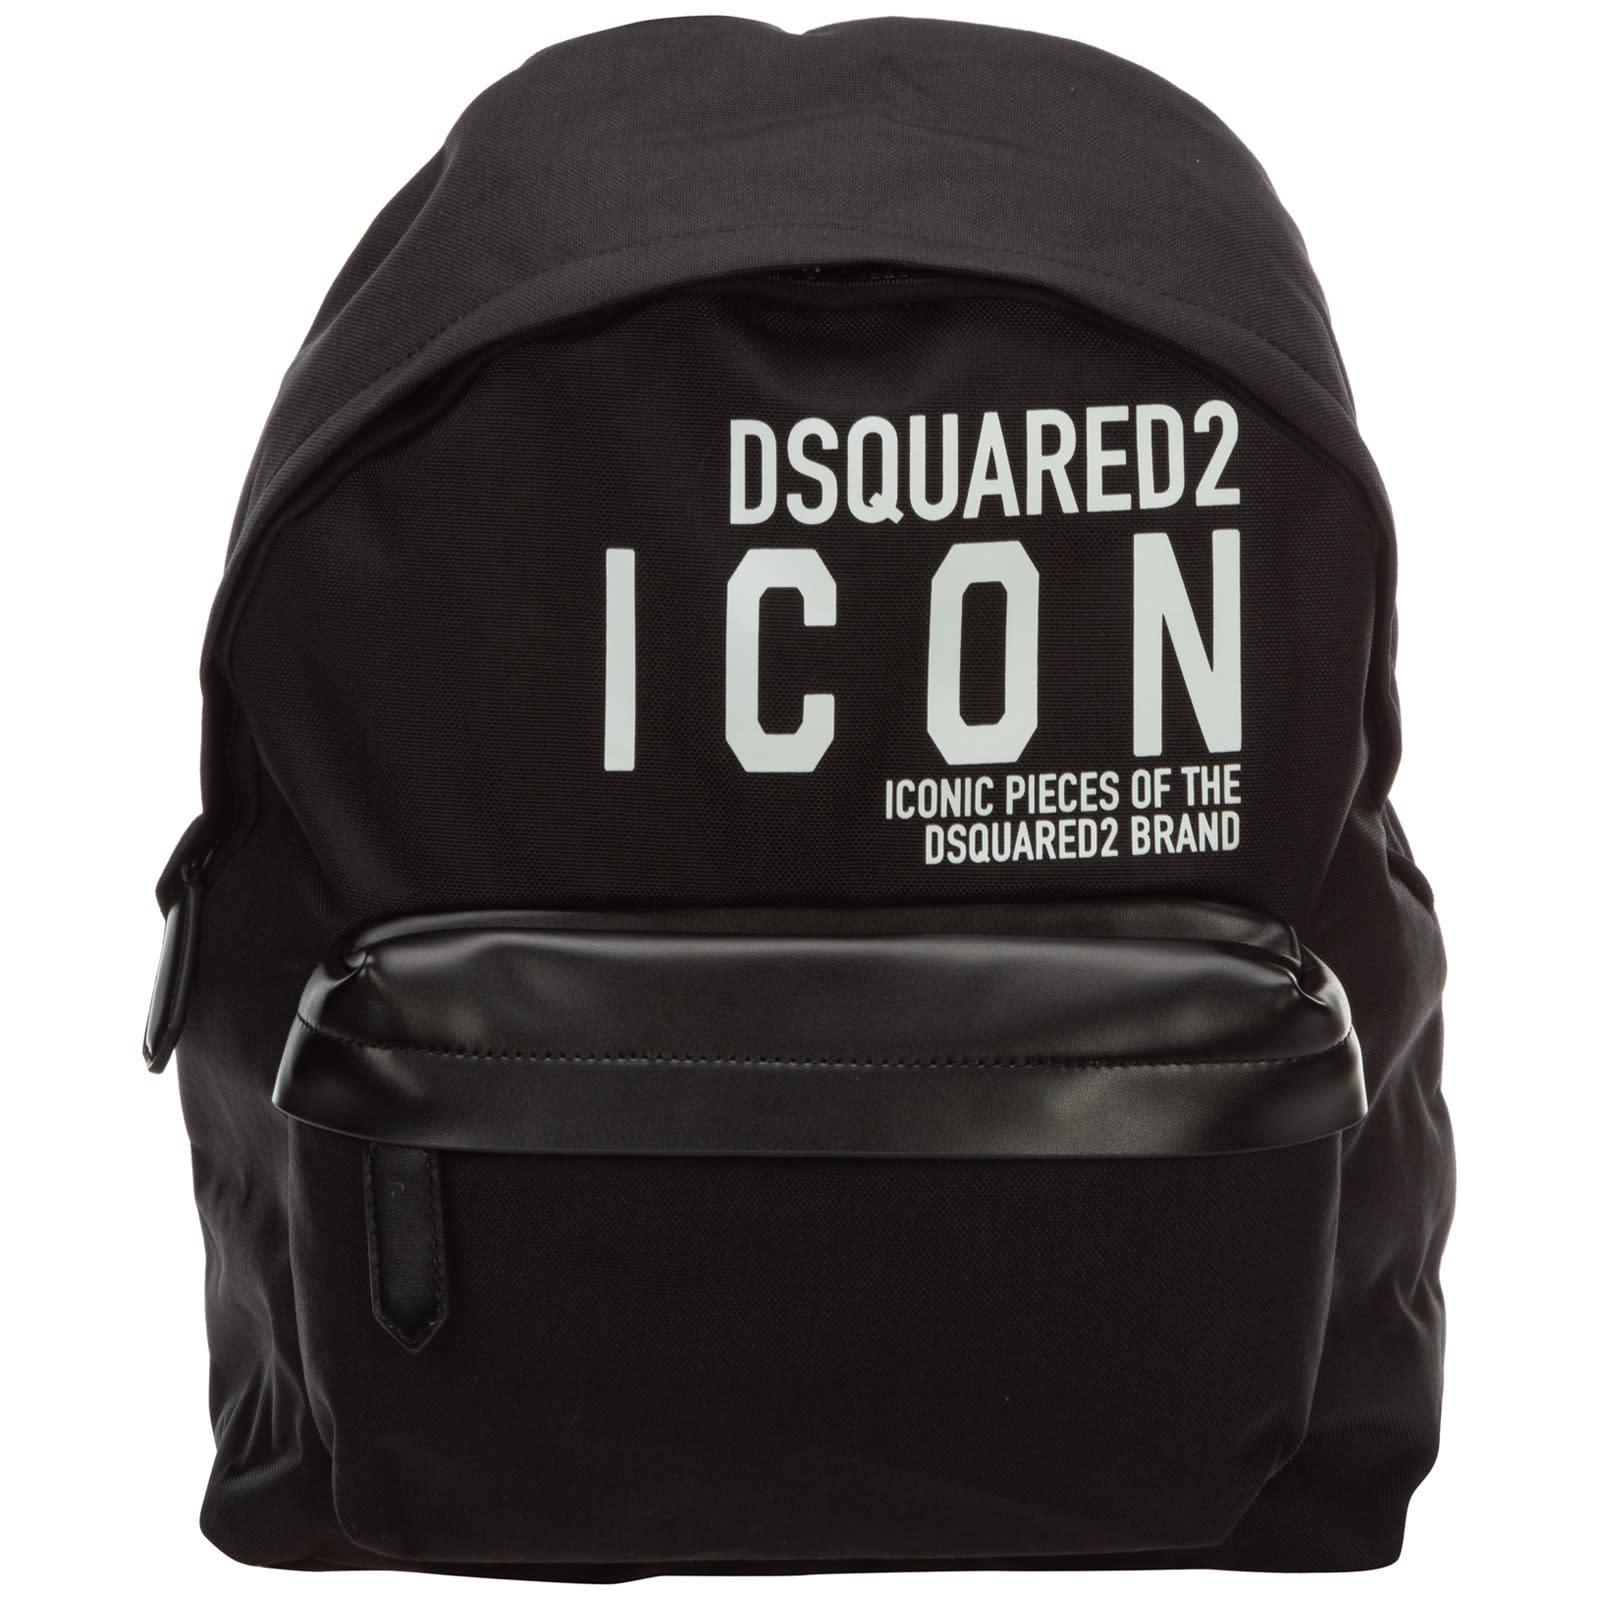 DSQUARED2 ICON BACKPACK,11280796